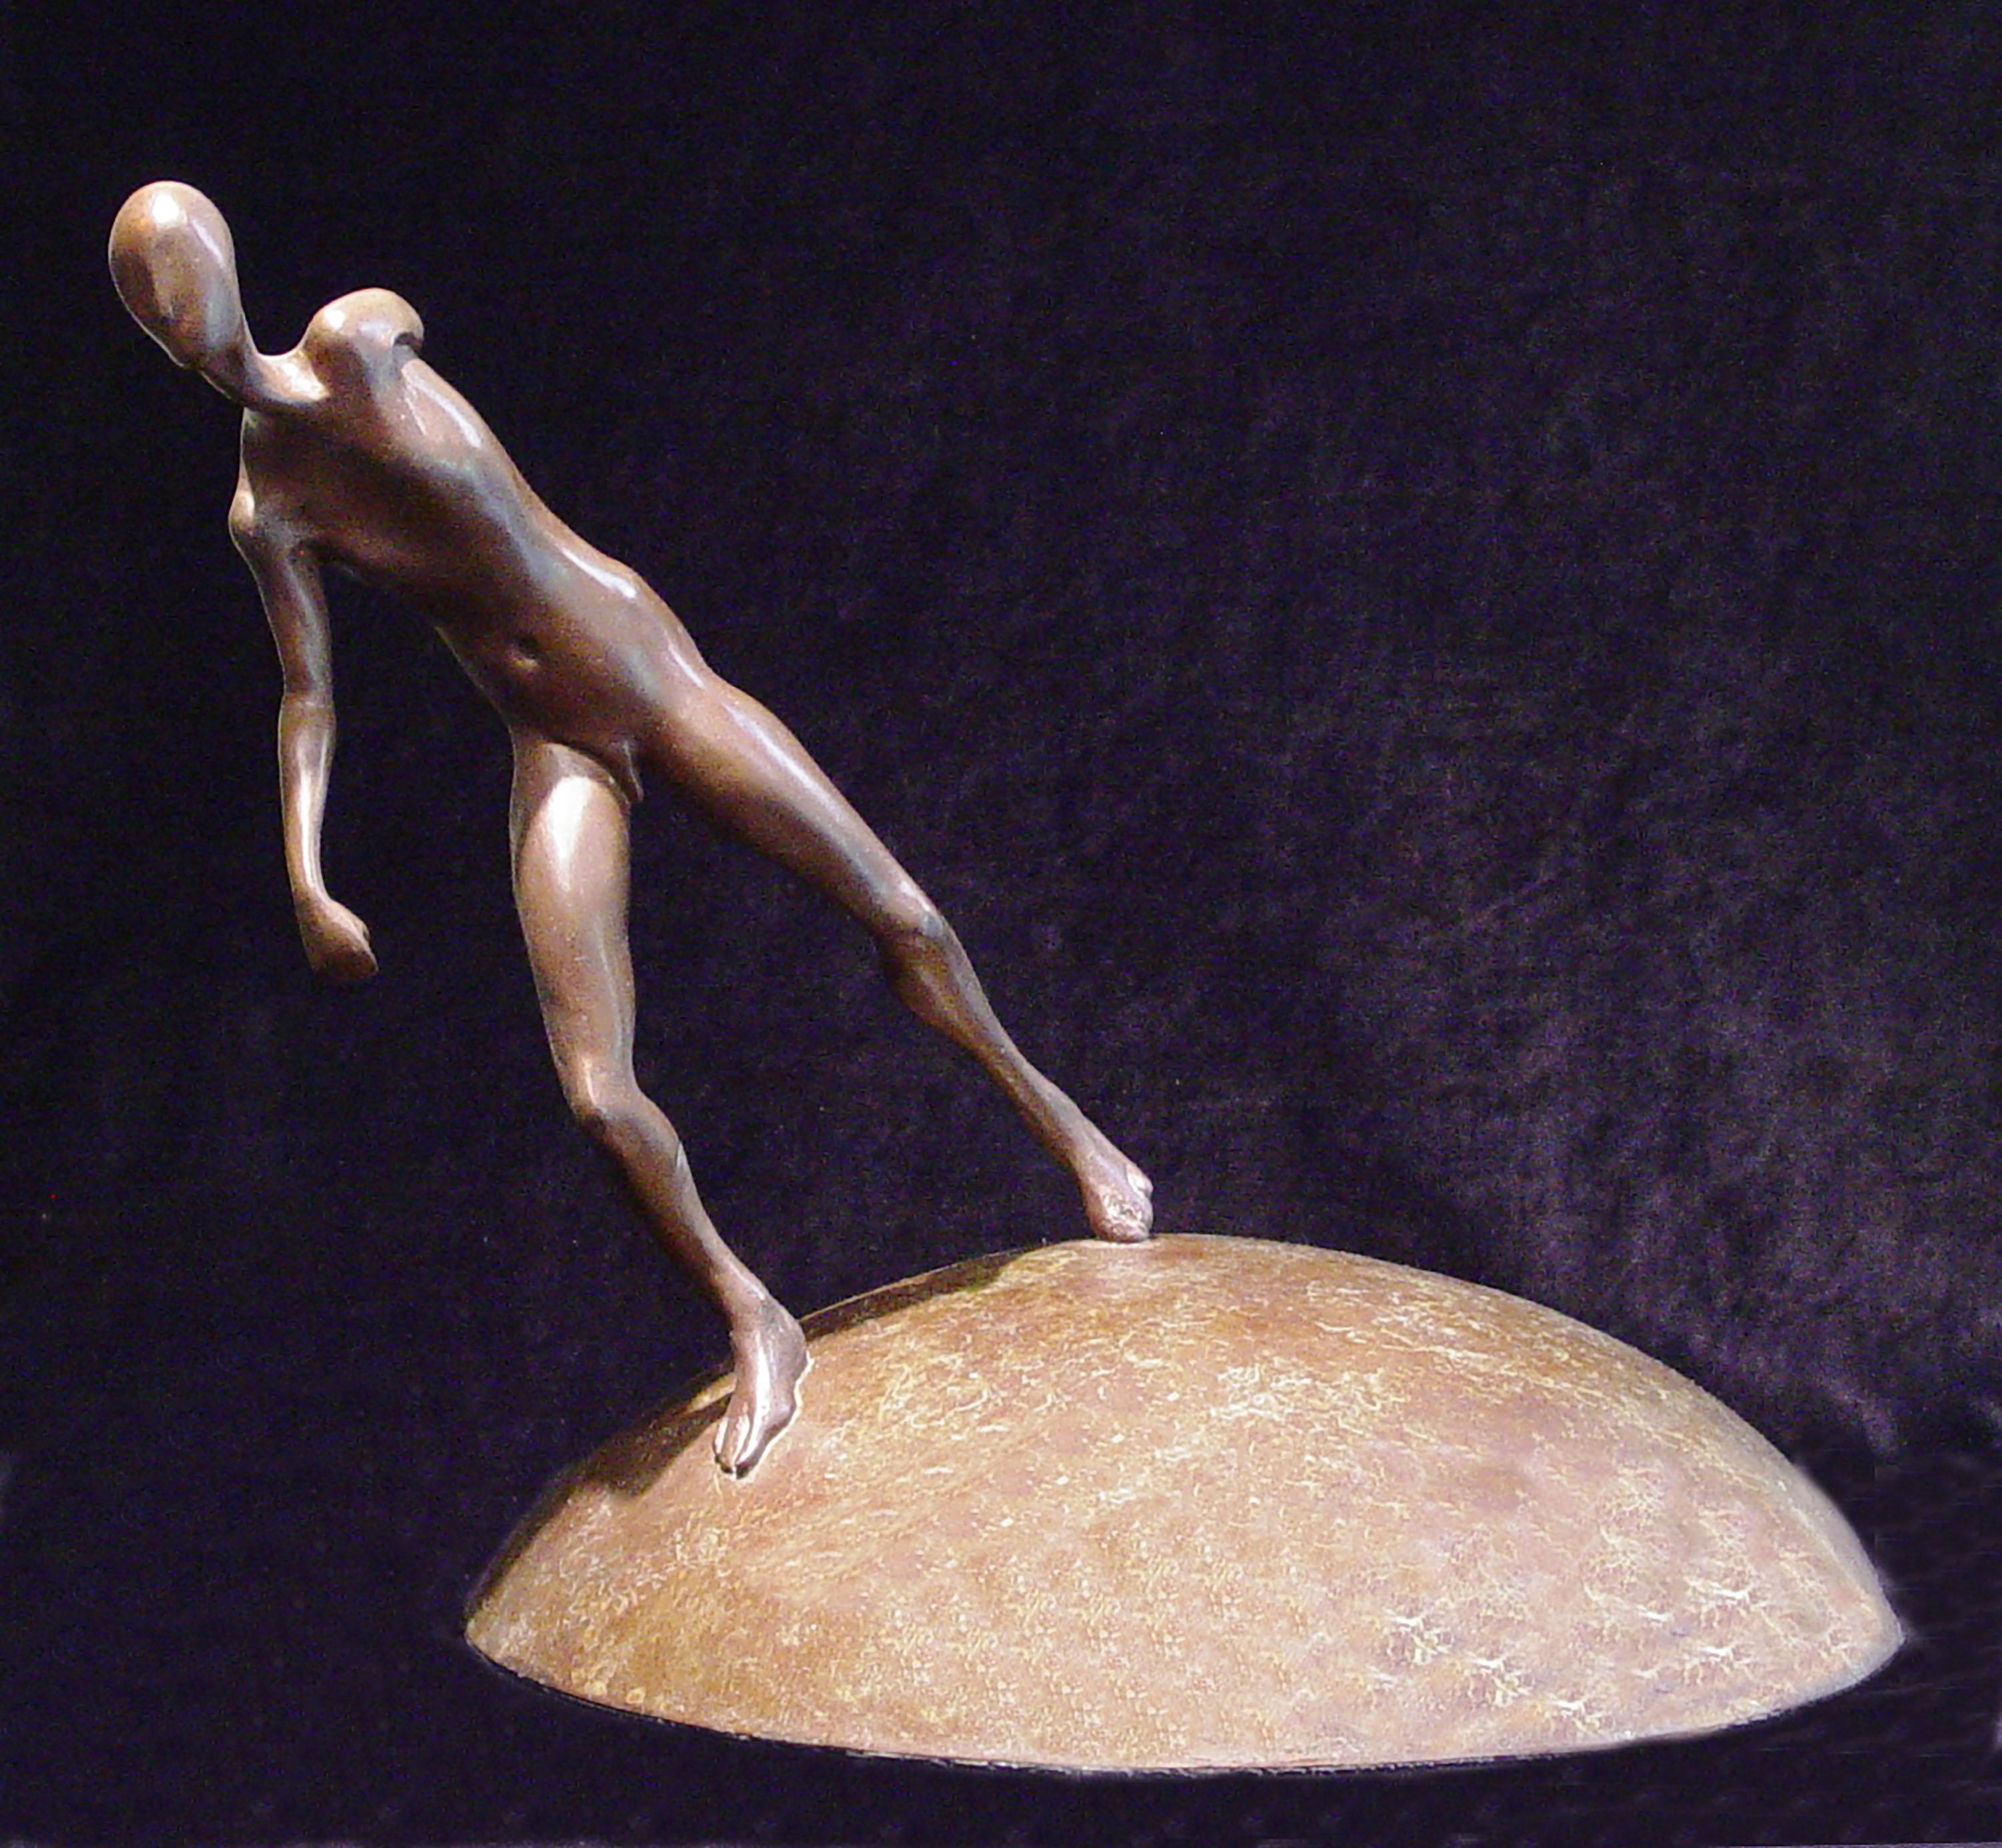 This beautiful bronze sculpture depicts a figure walking on top of a an orb, also in bronze.  The figure, with slightly abstracted features, is walking at a deep angle over the base of the piece. The position of the arms communicate the effort